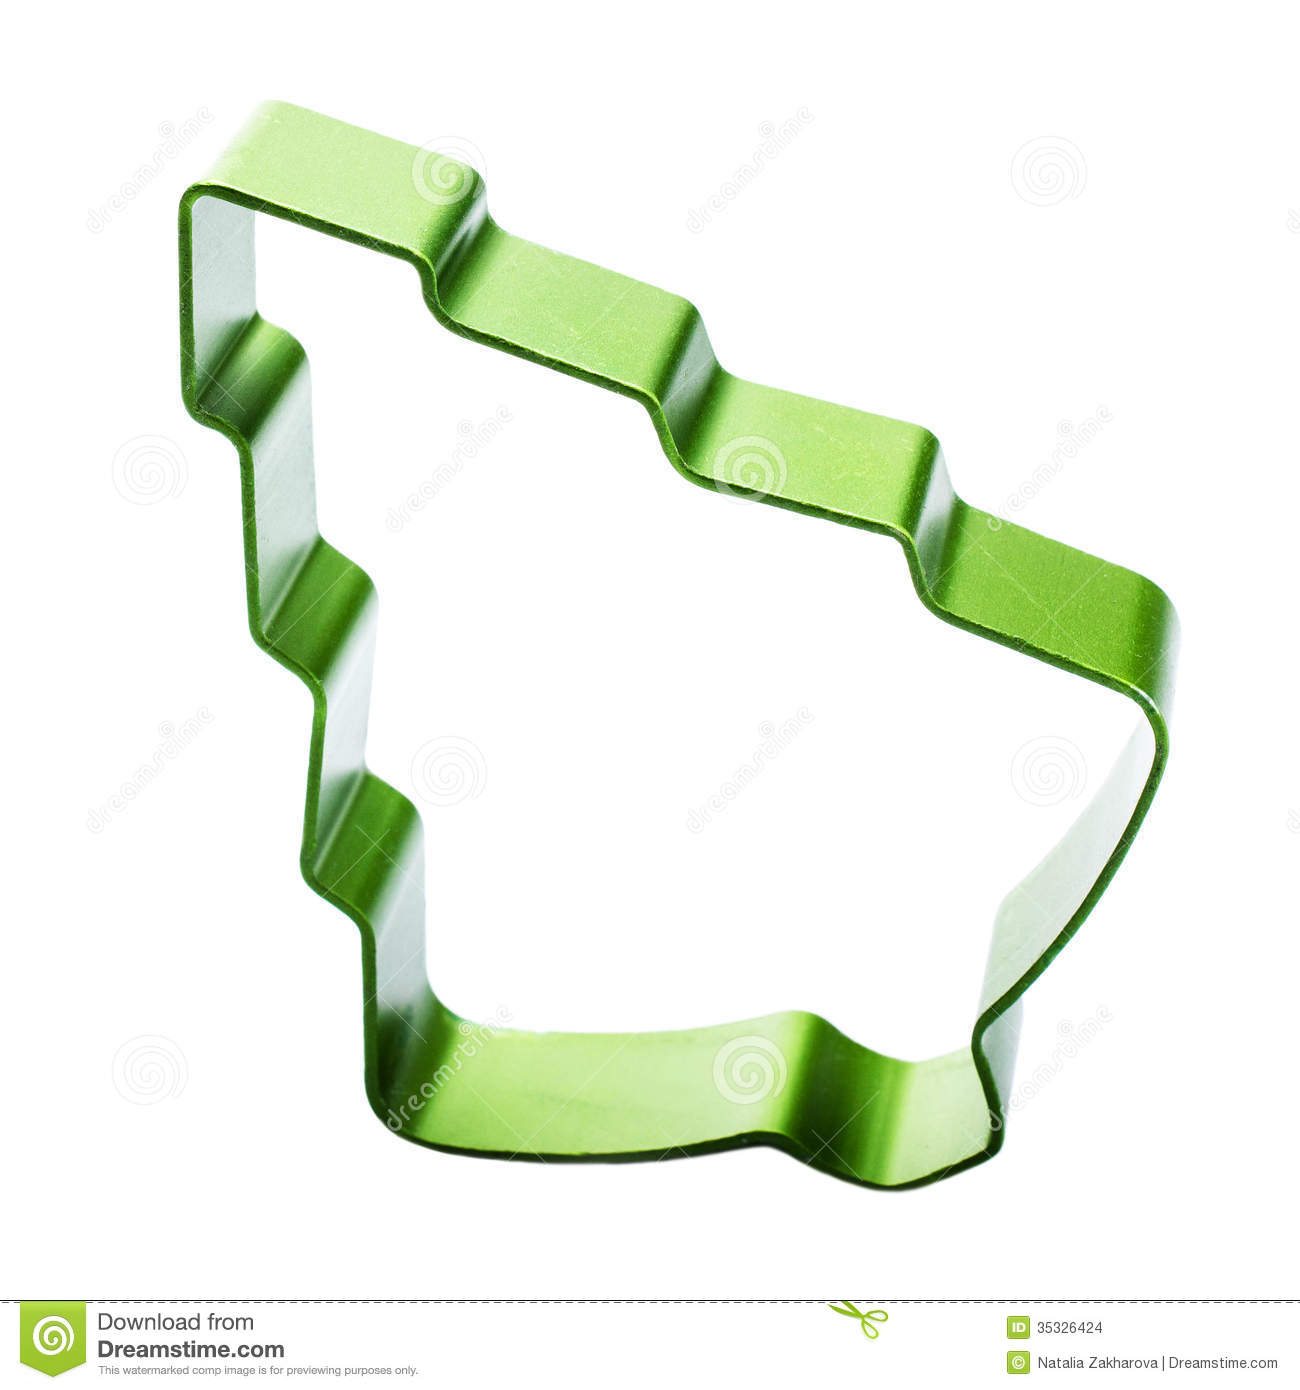 Christmas cookie cutter clipart.